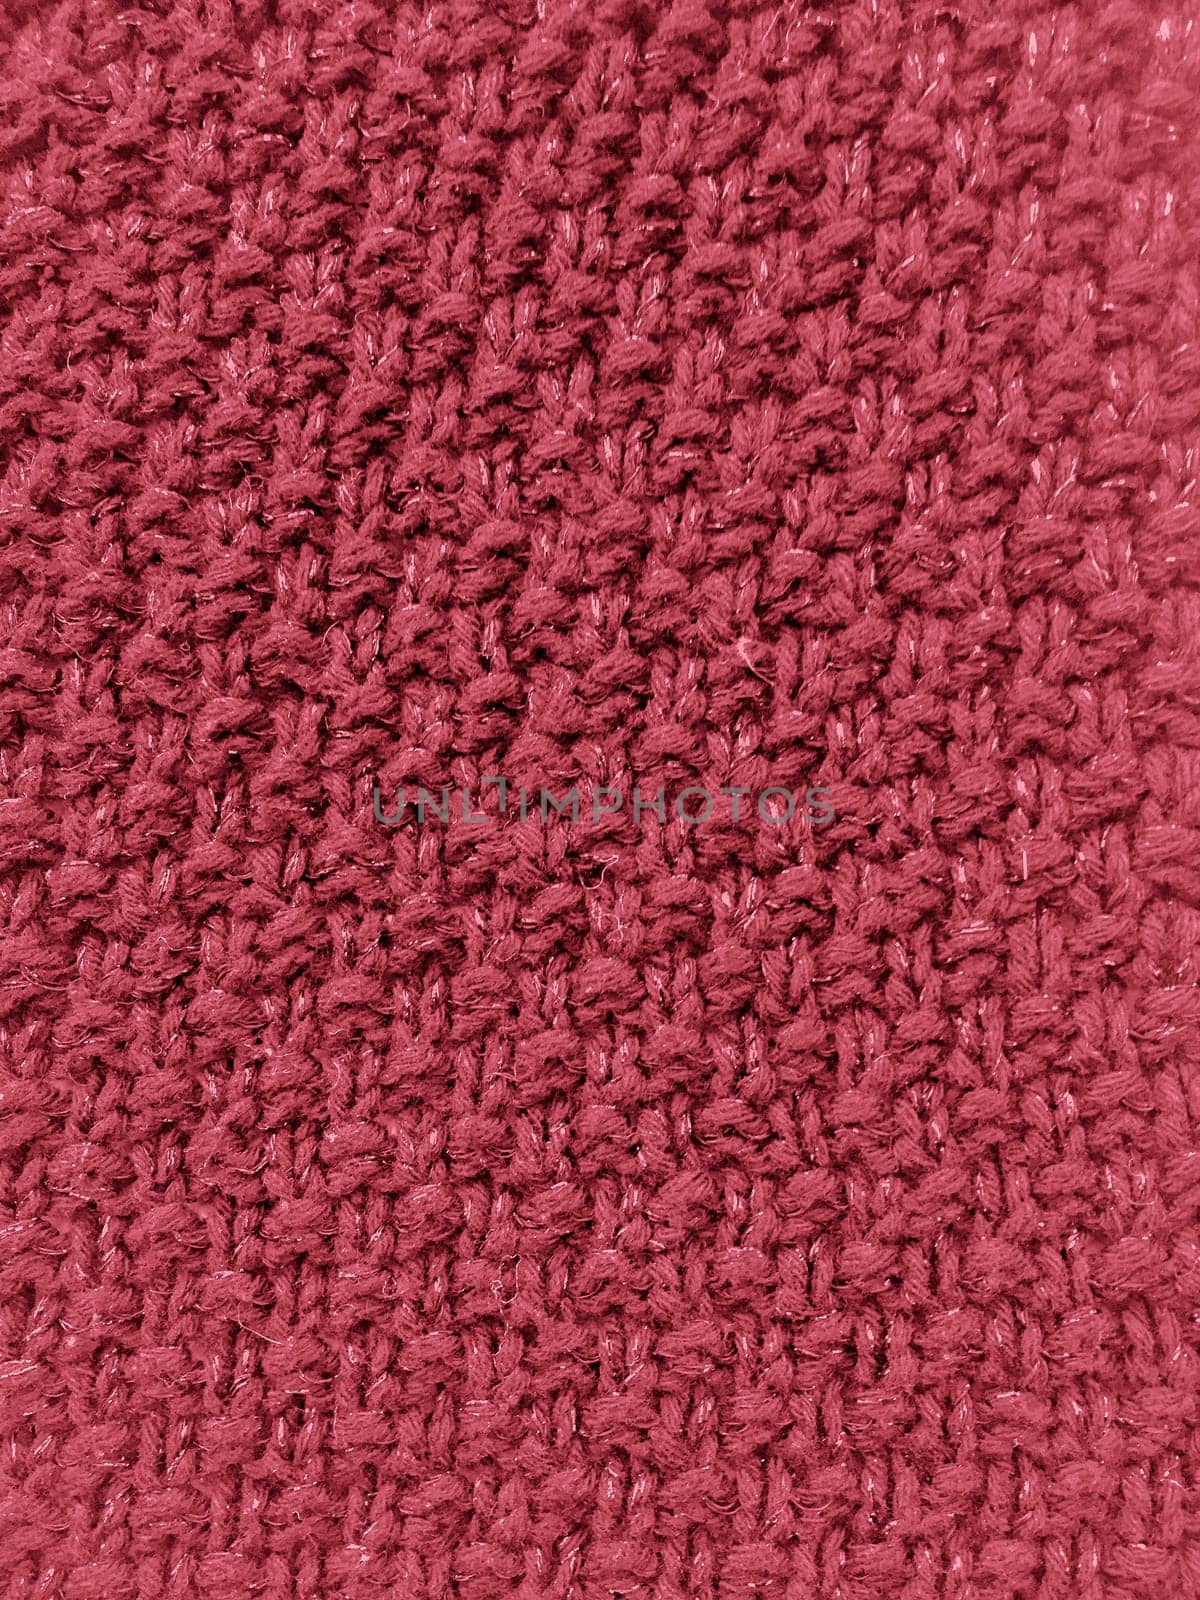 Christmas Knitted Texture. Organic Woolen Pullover. Macro Handmade Thread Wallpaper. Xmas Knitted Background. Vintage Winter Yarn. Cotton Nordic Material. Red Xmas Knitting Pattern.